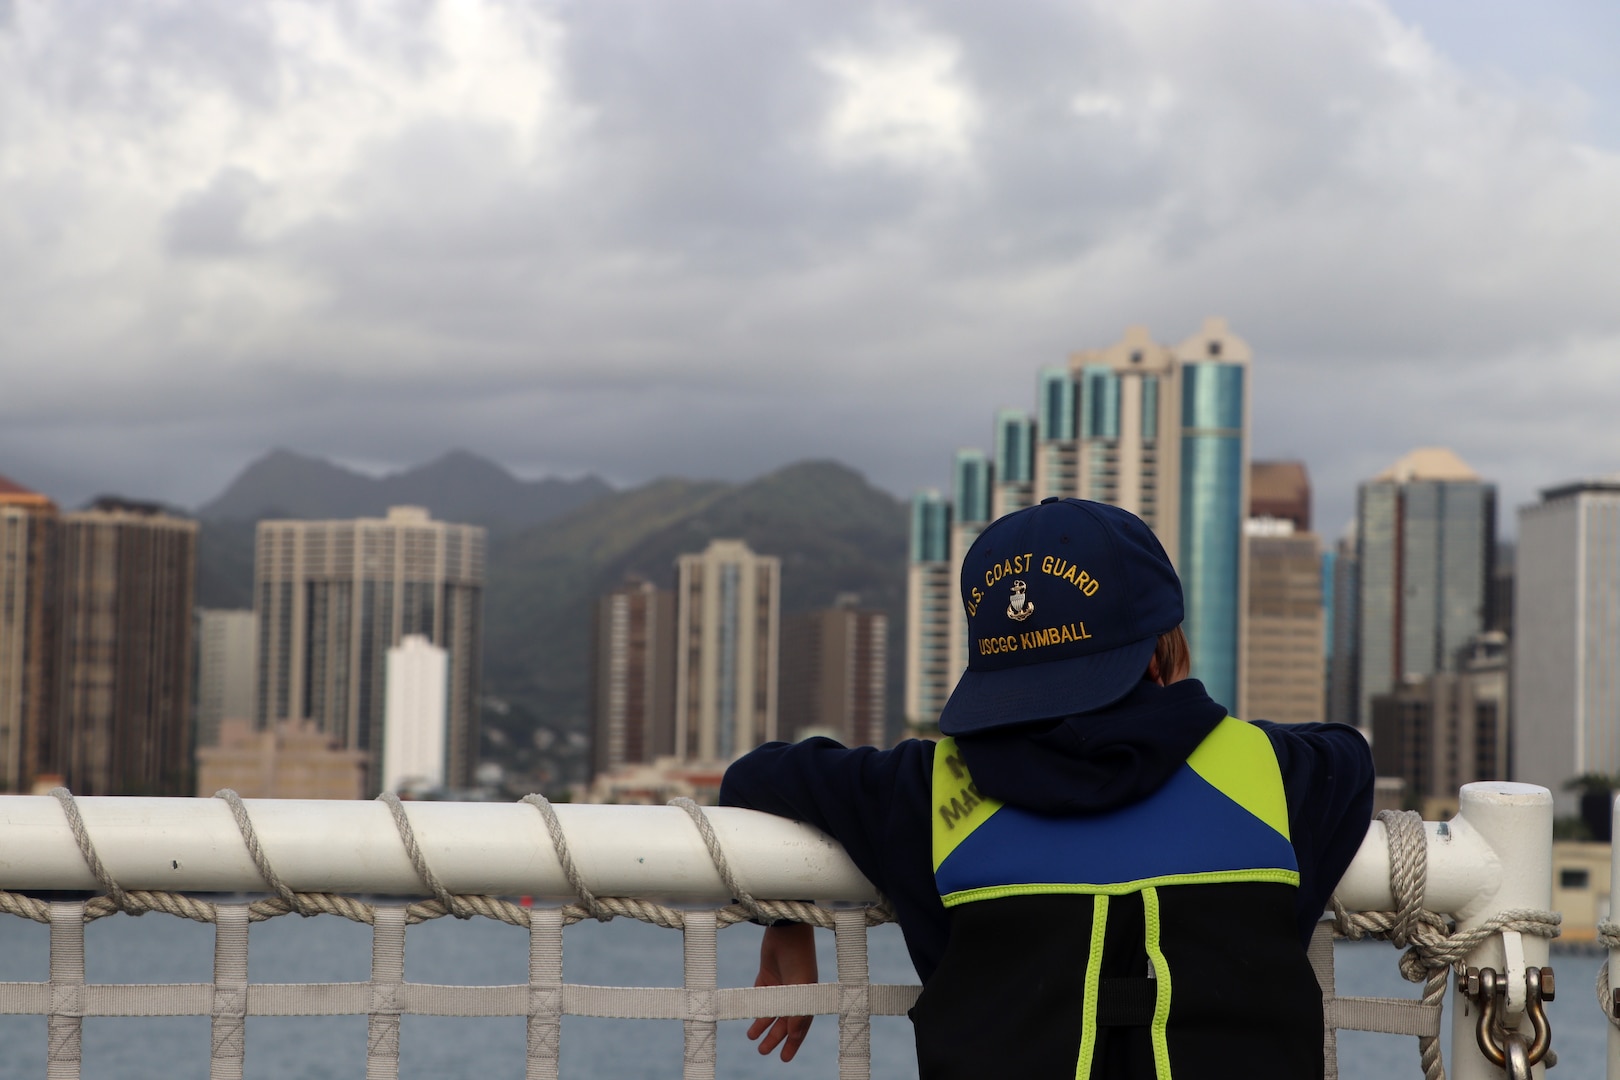 The famliy member of a U.S. Coast Guard Cutter Kimball (WMSL 756) crew member looks at Honolulu's skyline from the Kimball as Kimball returns to Honolulu following a 42-day Western Pacific patrol, March 10, 2023. Kimball was the first U.S. military ship in recent history to visit the port city of Kagoshima, Japan, during their patrol where the crew partnered with servicemembers from Japan Coast Guard’s 10th District to plan and conduct combined operations and search-and-rescue exercises. U.S. Coast Guard photo by Ens. Philip Rogers.